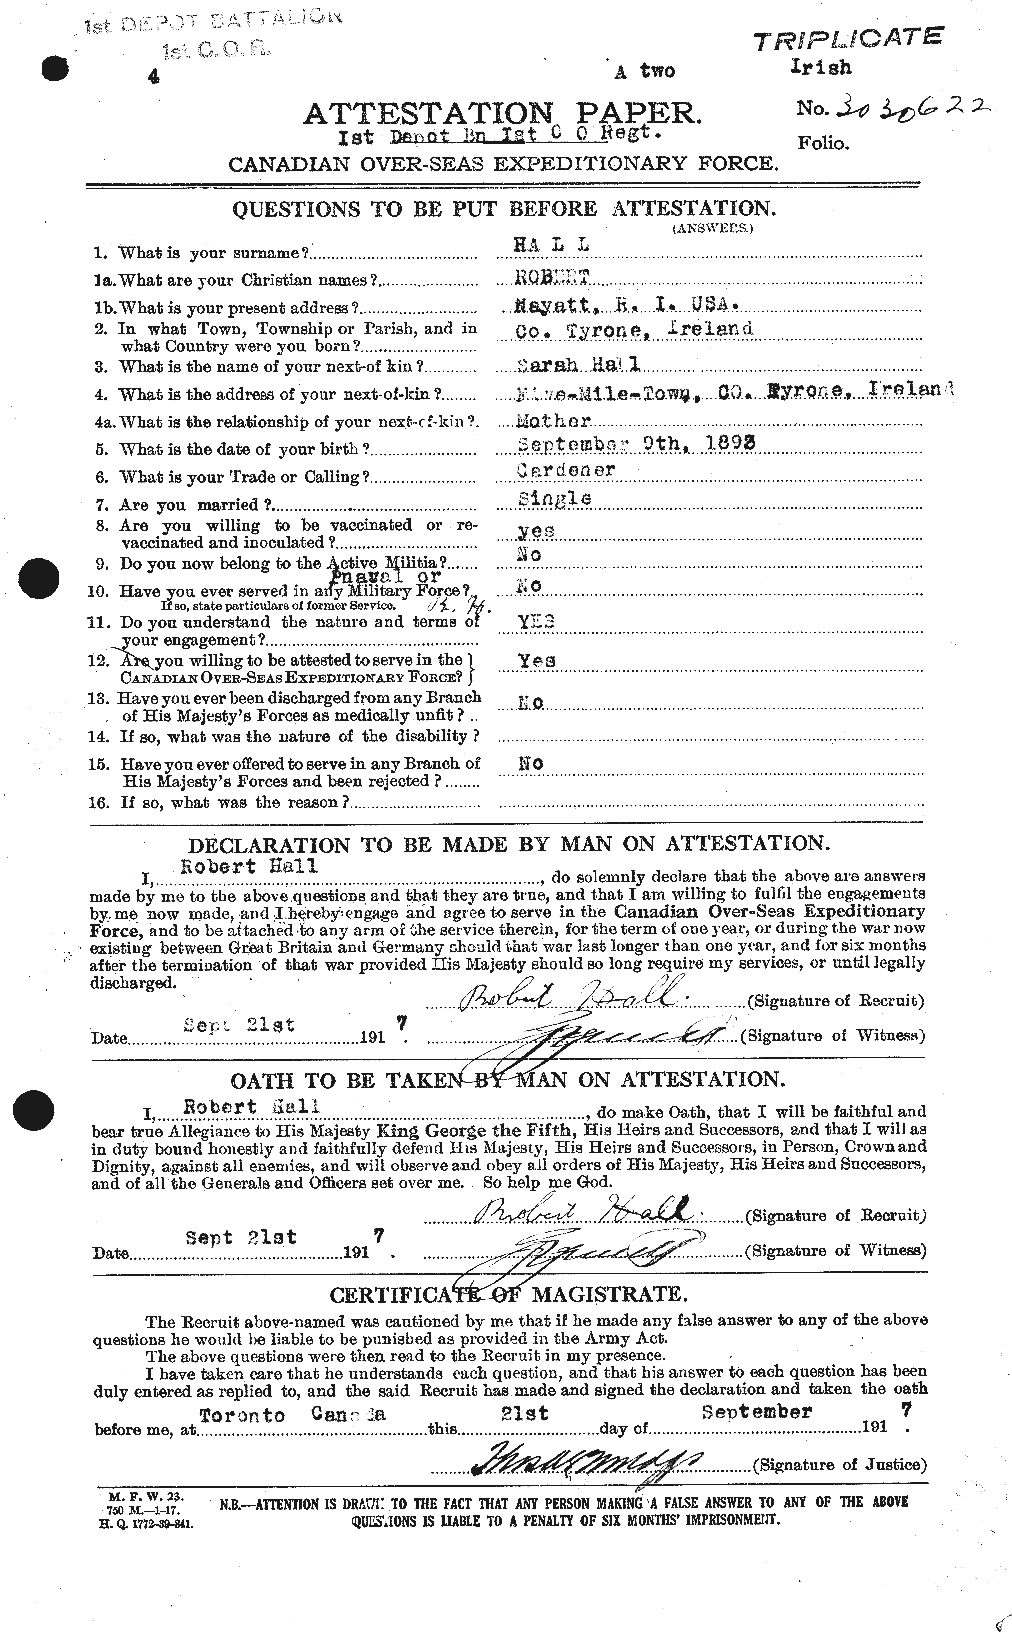 Personnel Records of the First World War - CEF 370737a